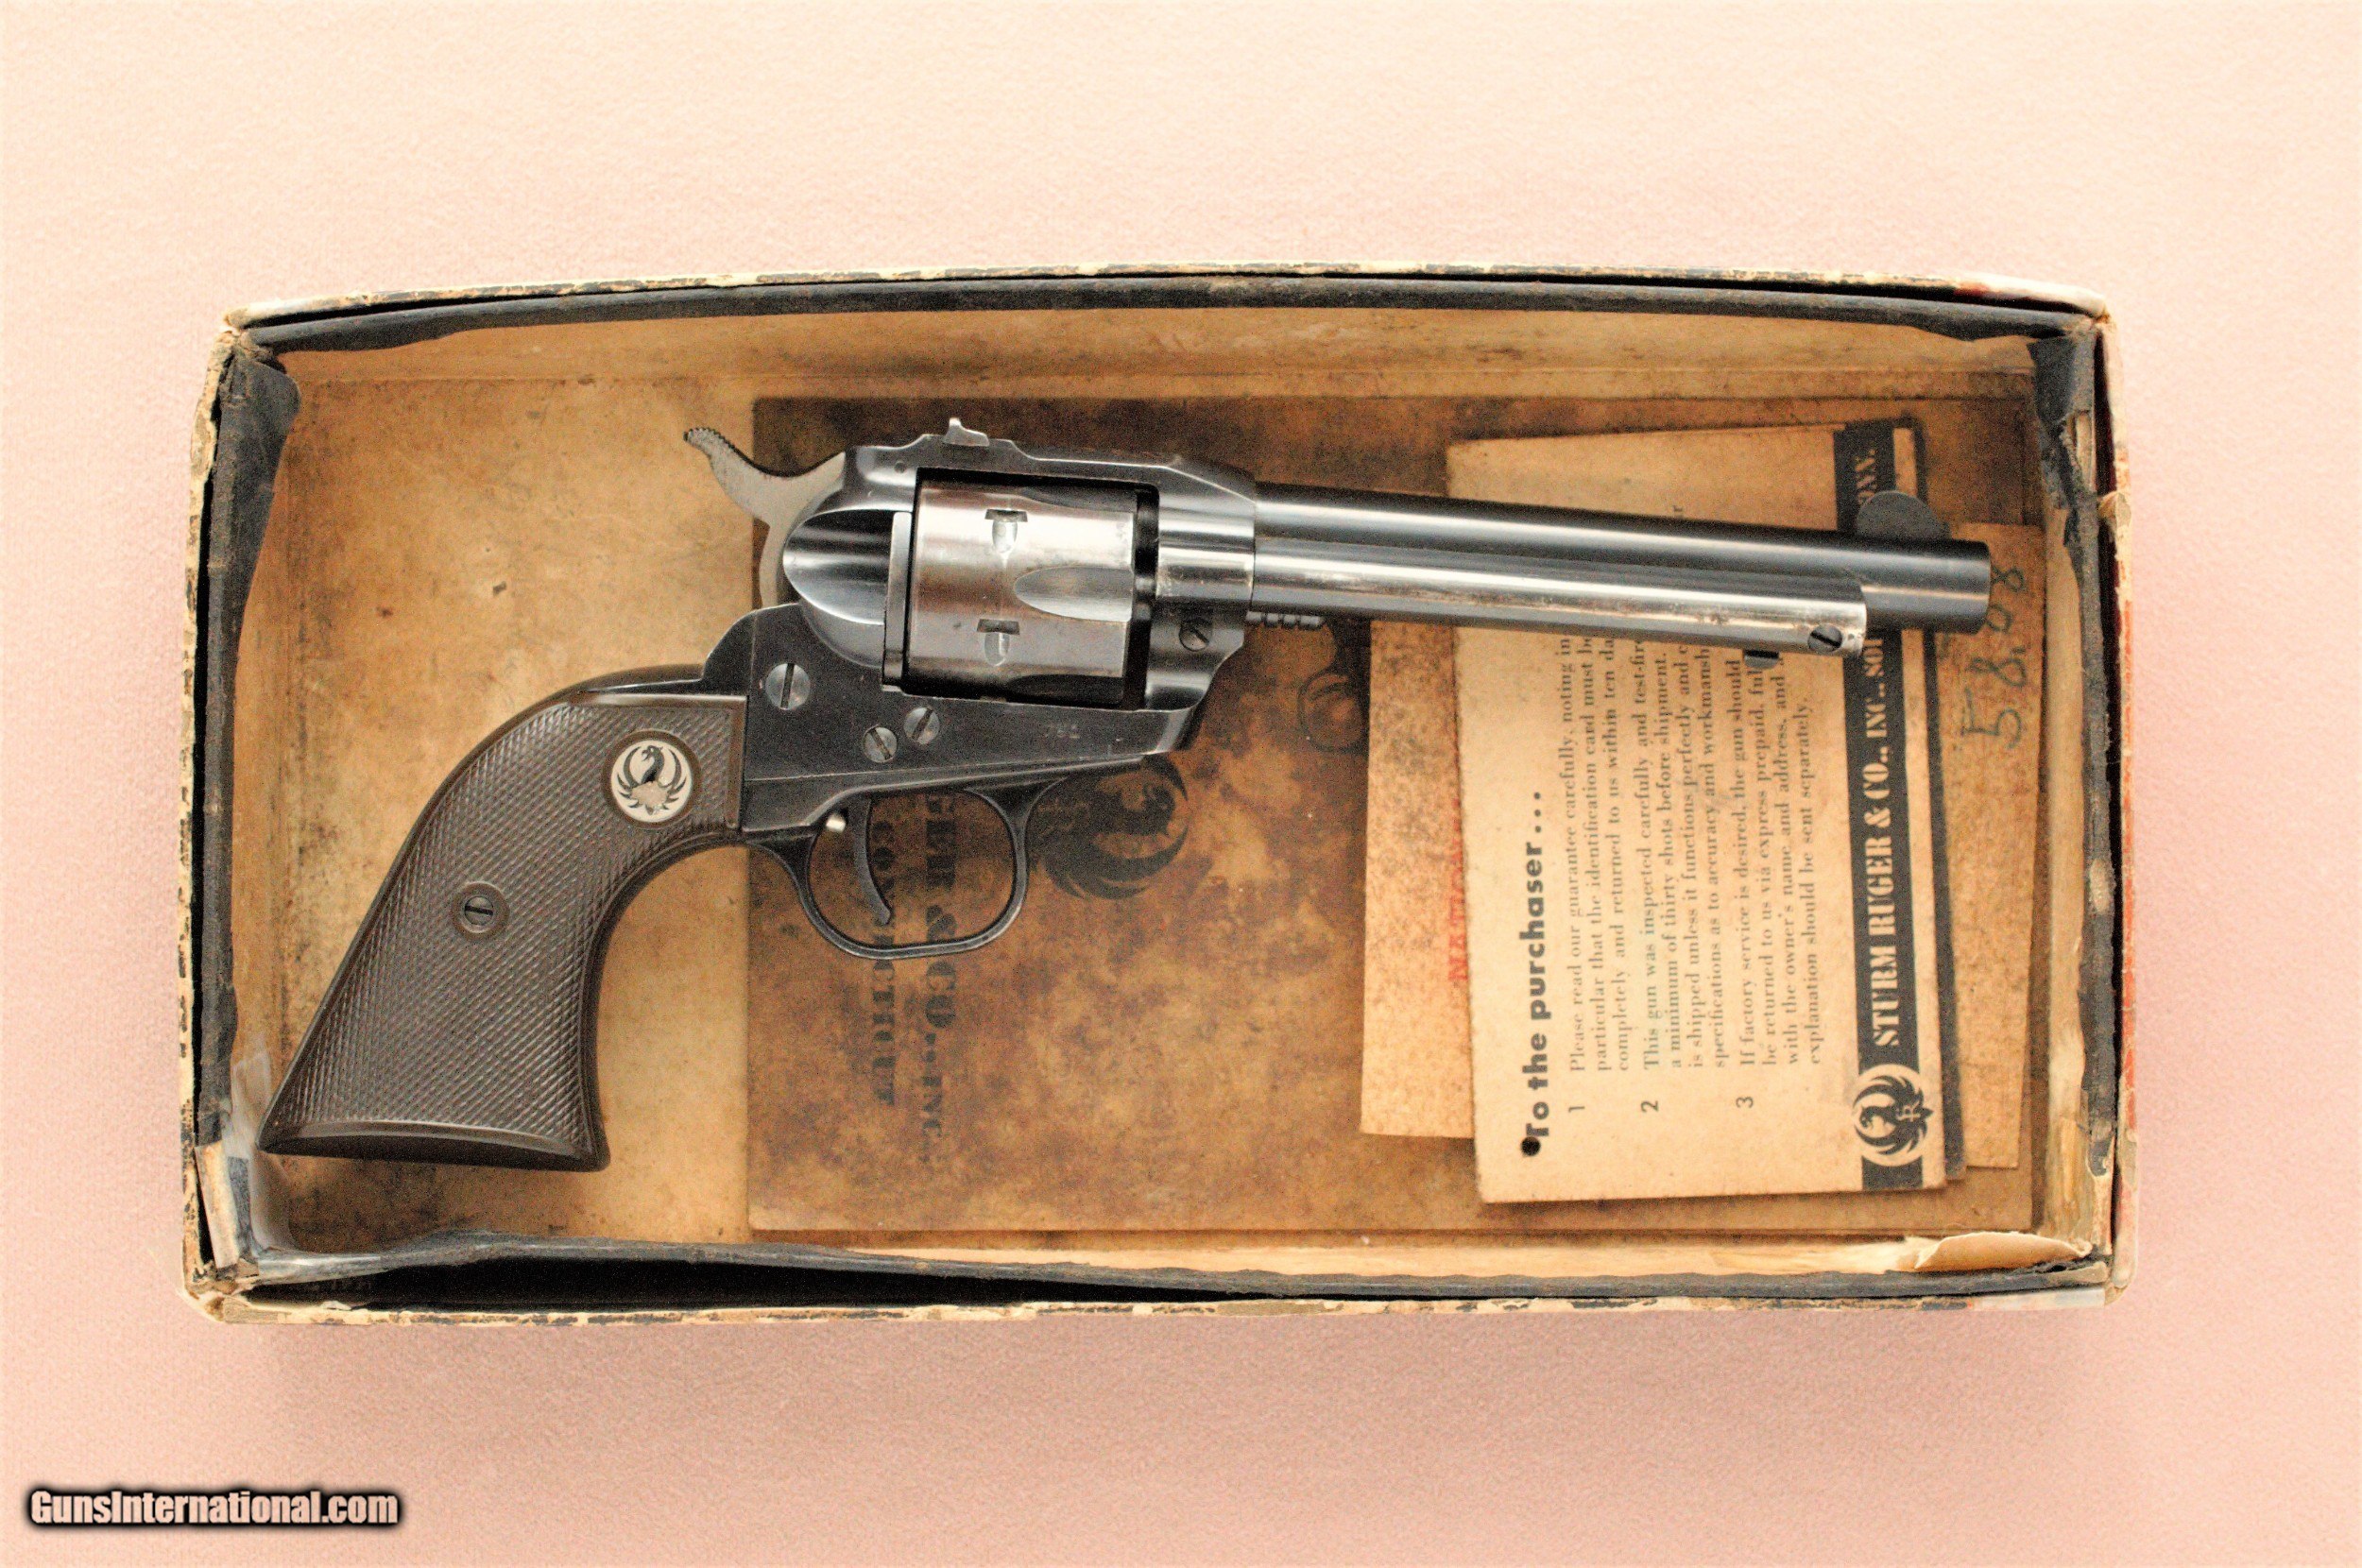 ruger single six serial numbers old model